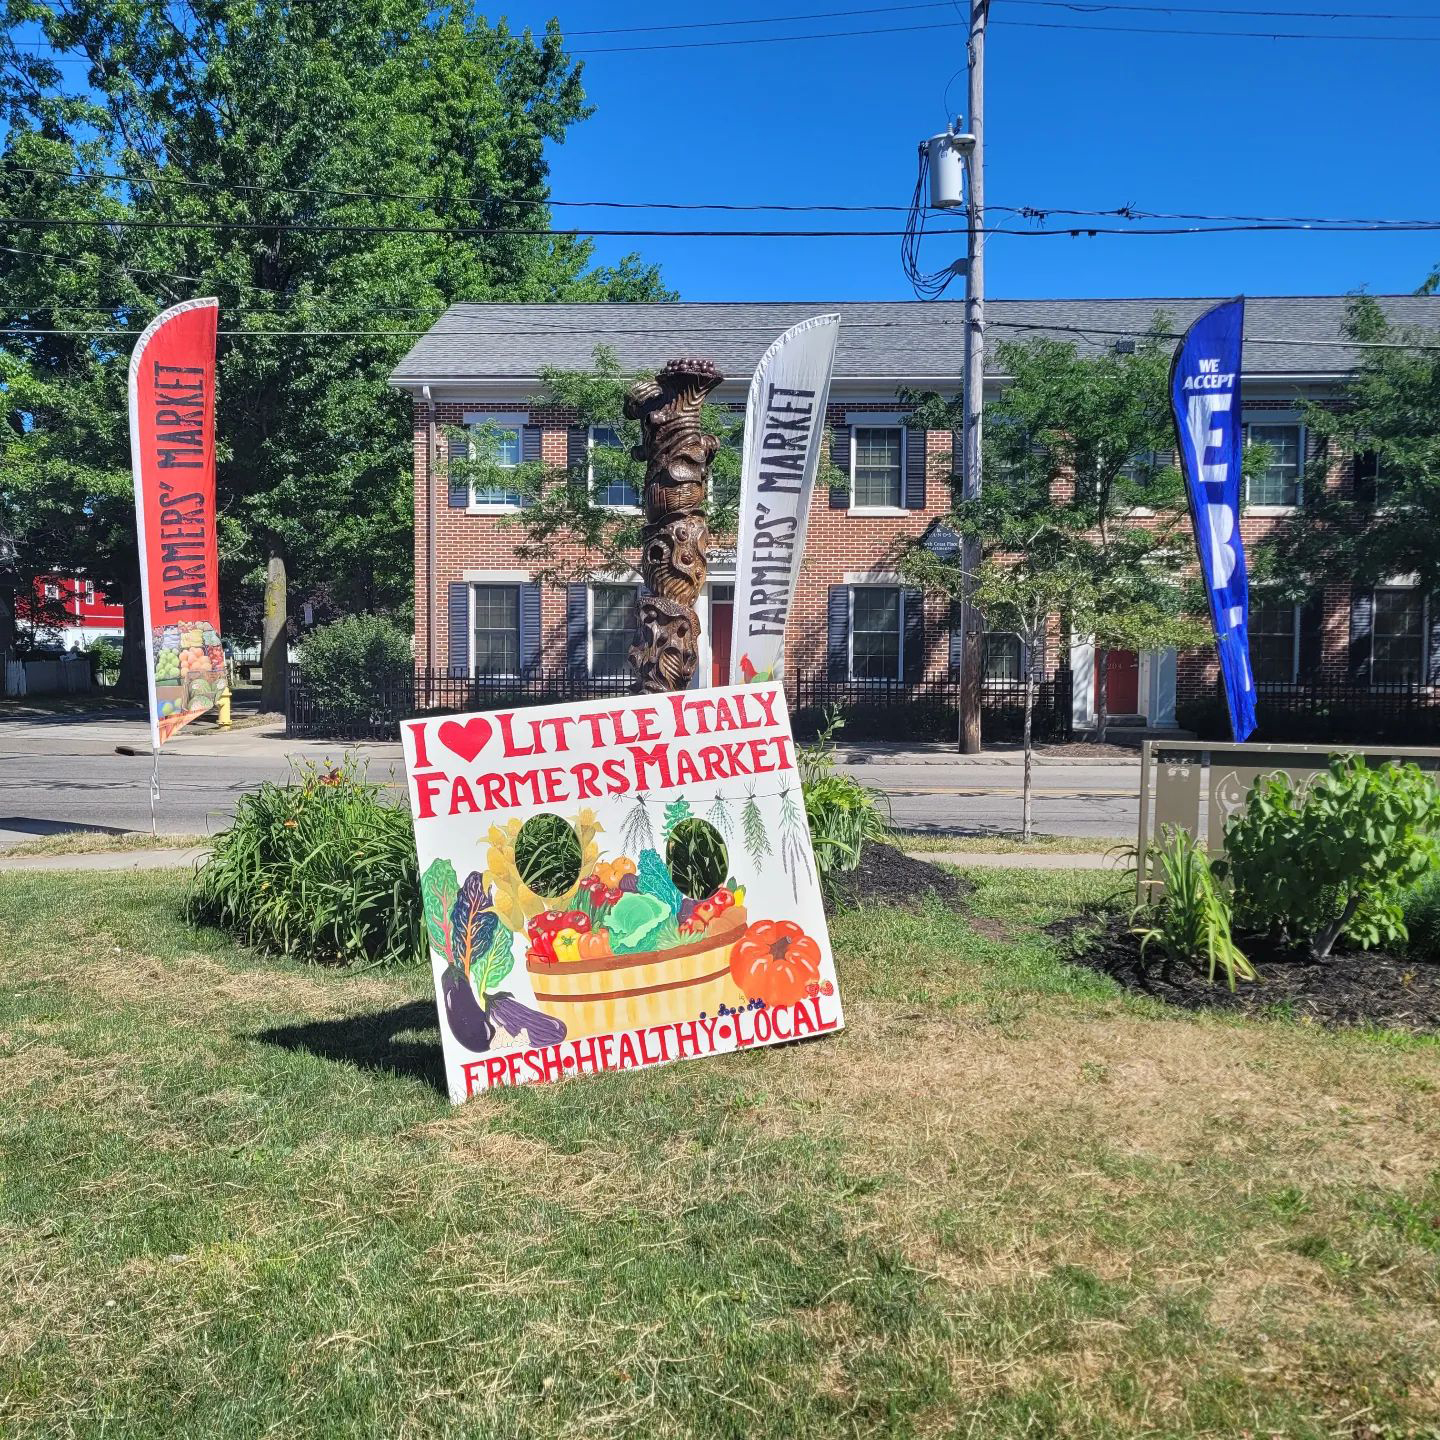 Colorful sign announcing the I Love Little Italy Farmers Market, photo credit to Sisters of St. Joseph in Northeastern PA